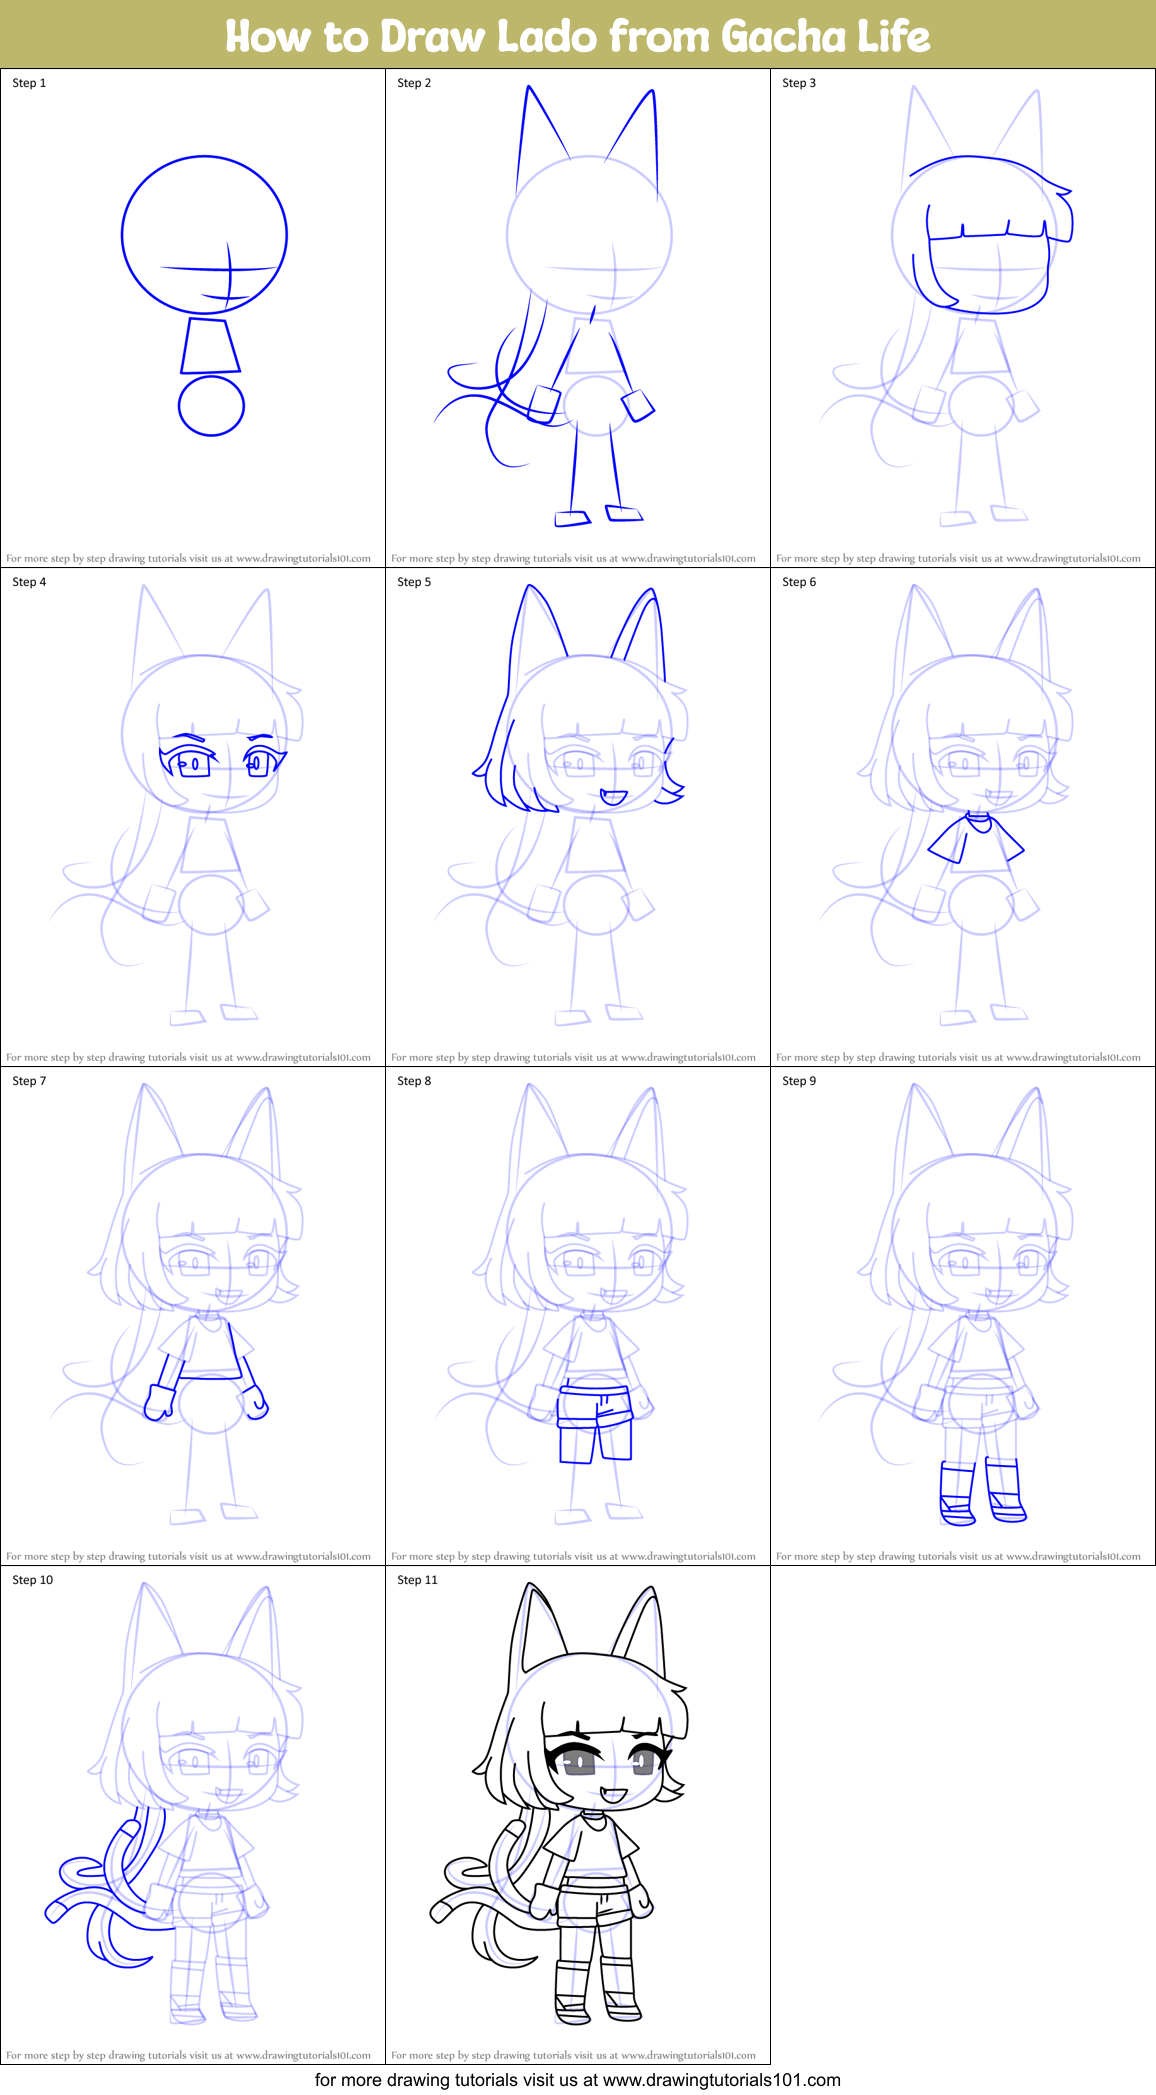 How To Draw Lado From Gacha Life Printable Step By Step Drawing Sheet Drawingtutorials101 Com